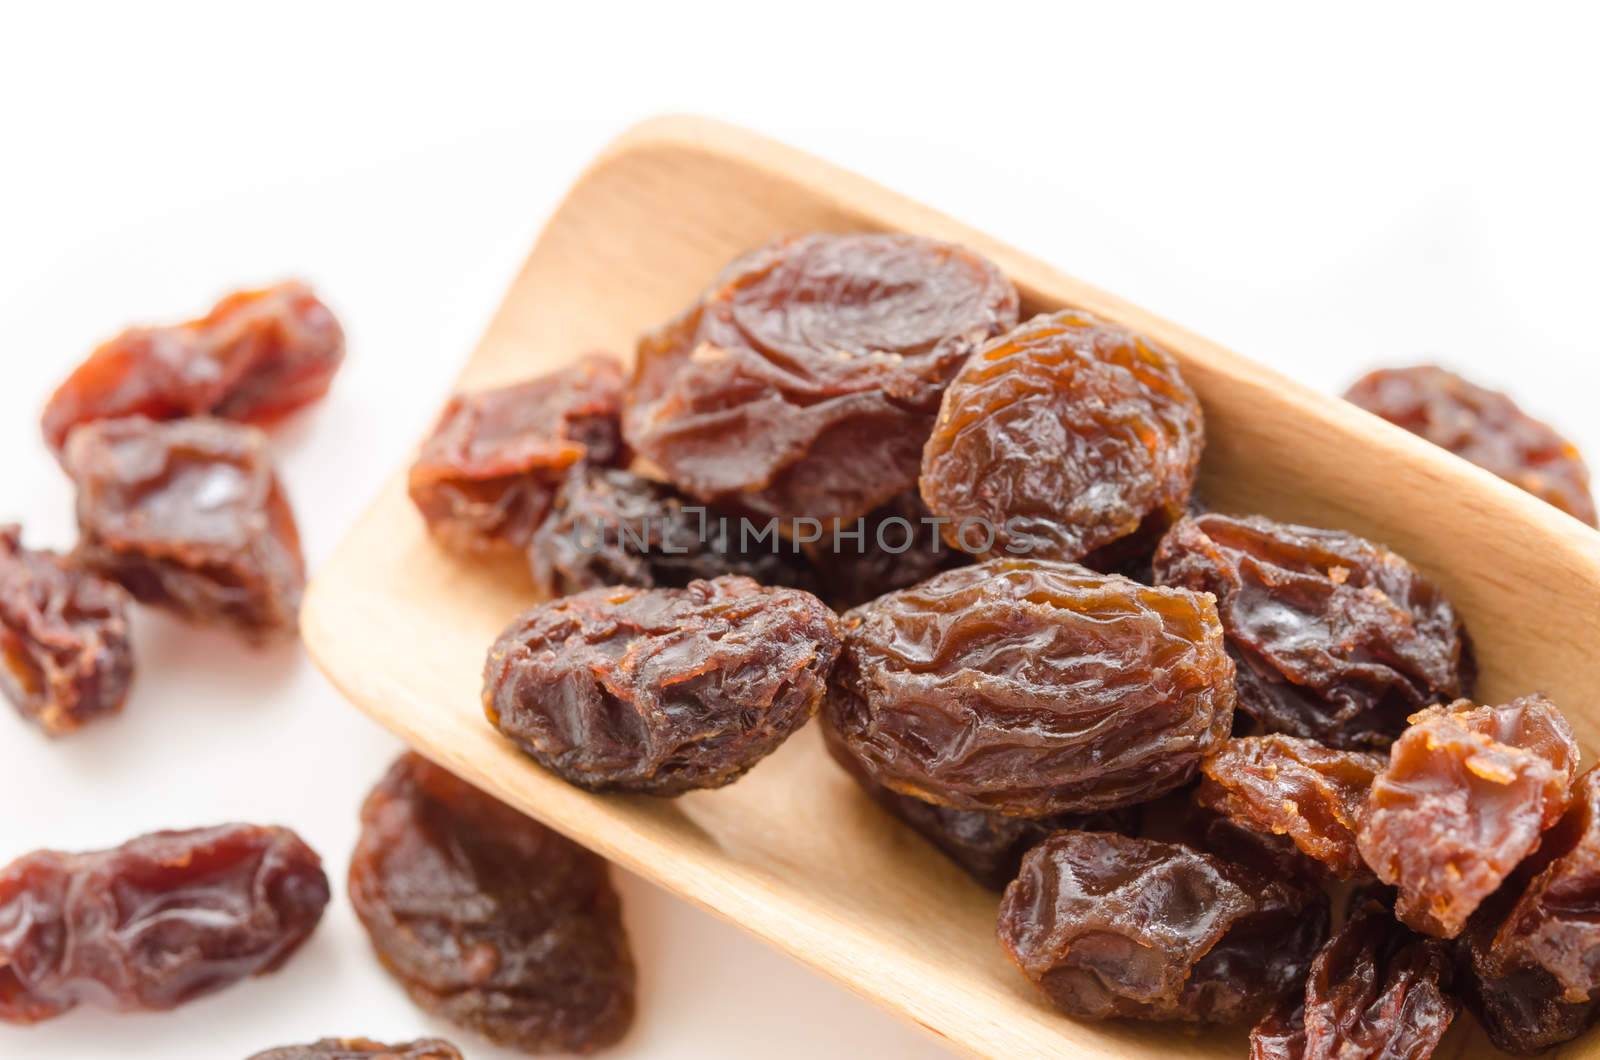 Raisins in a wooden spoon on white background. Close-up.